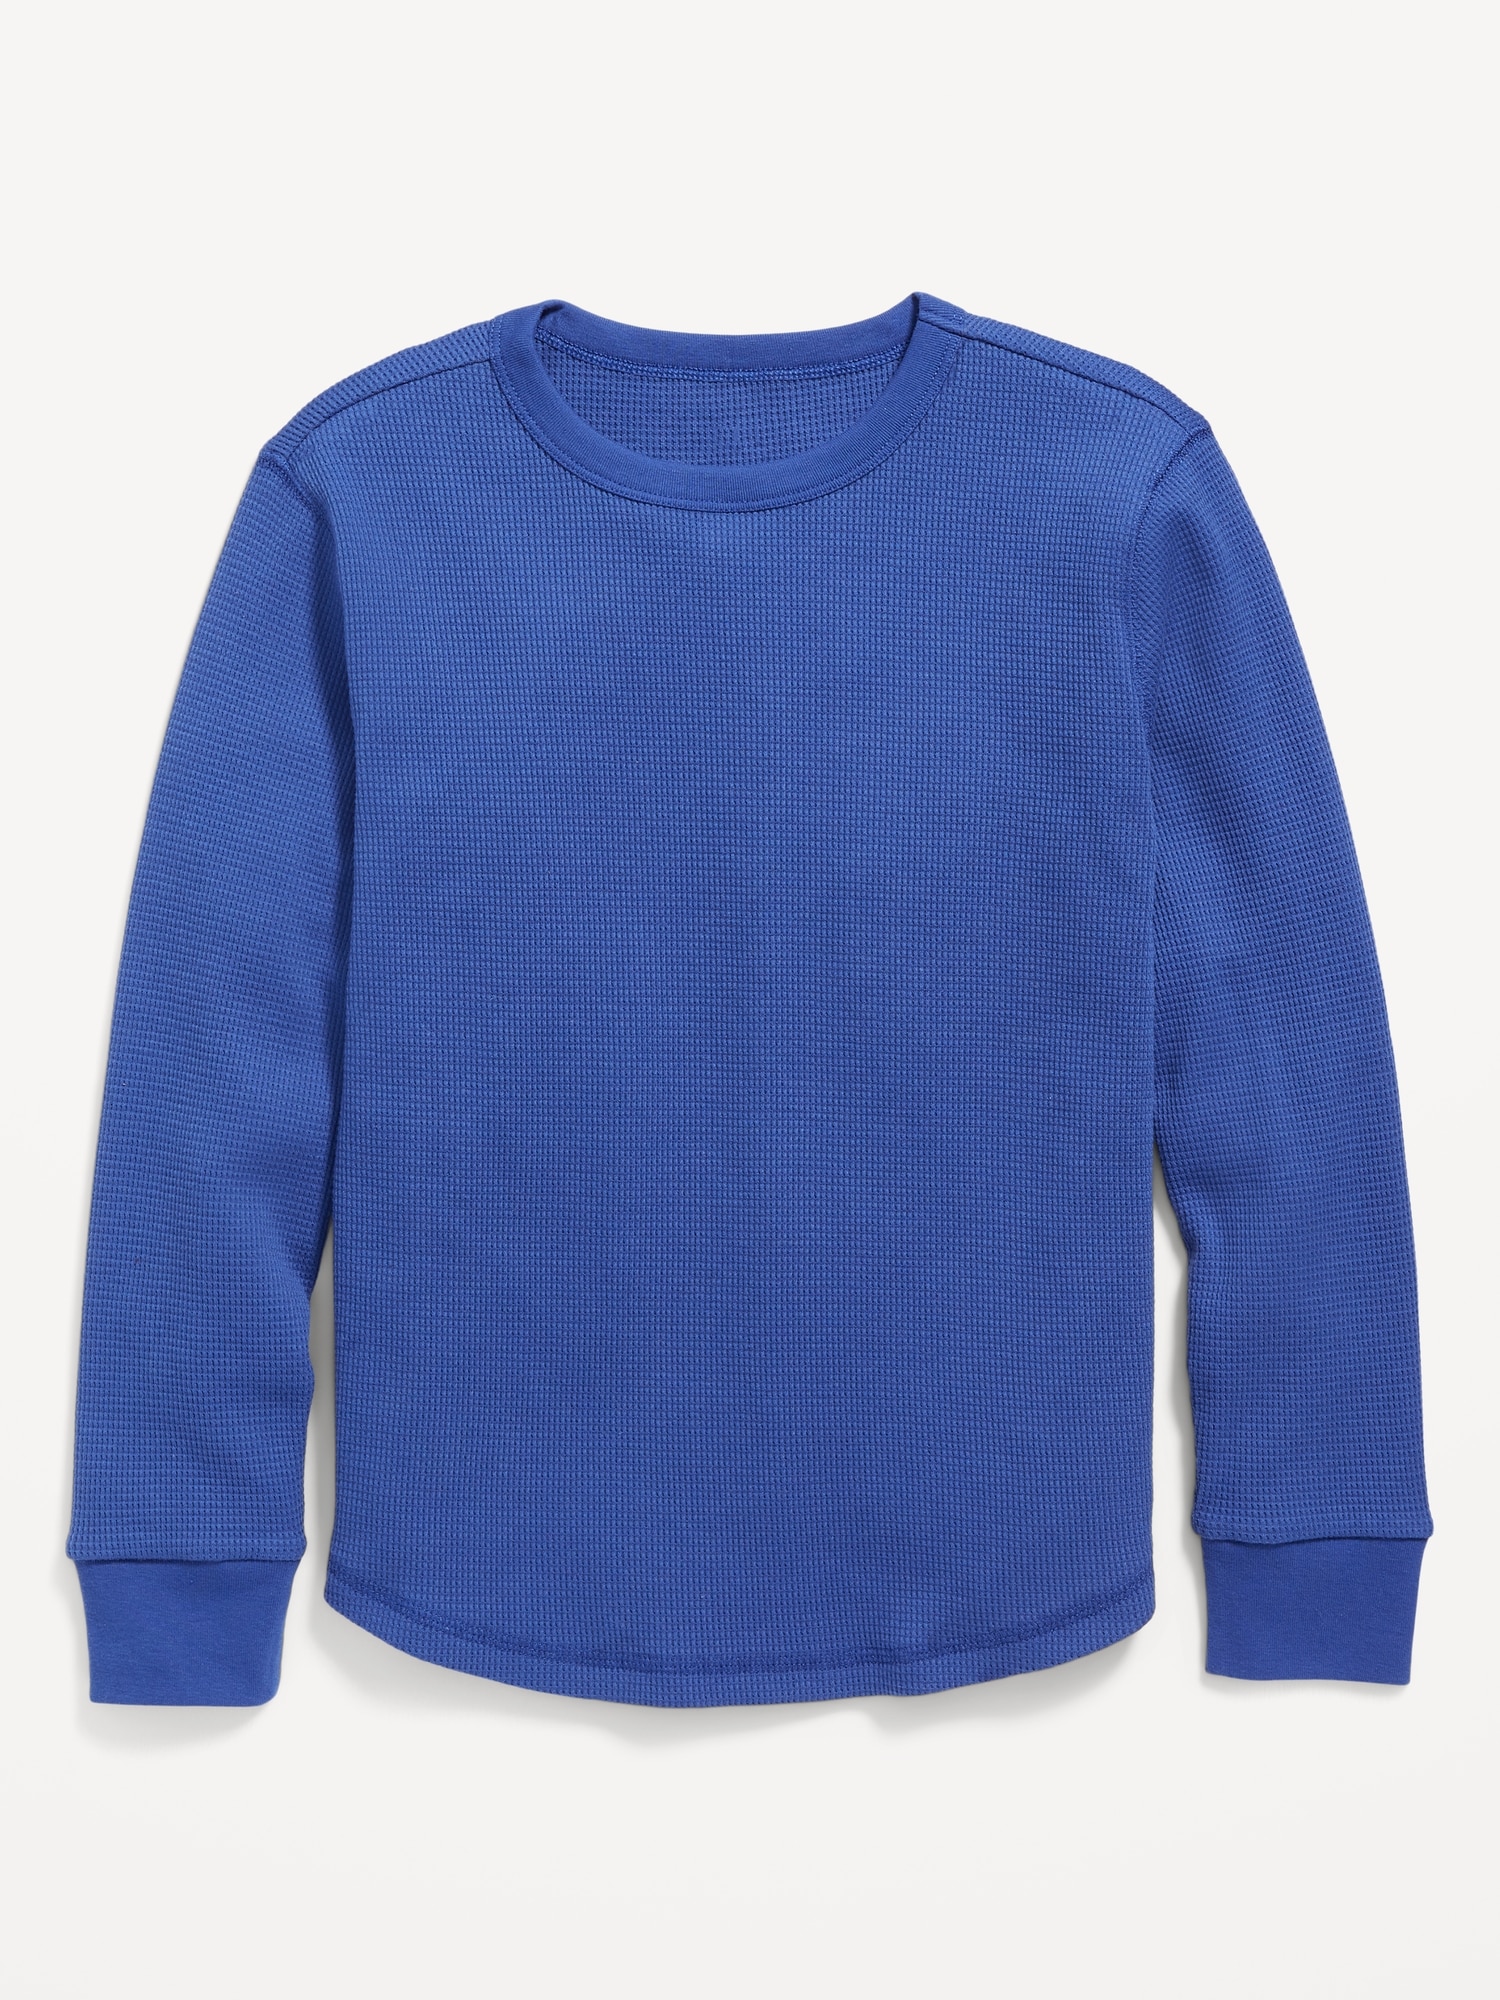 Long-Sleeve Thermal-Knit Solid T-Shirt for Boys | Old Navy